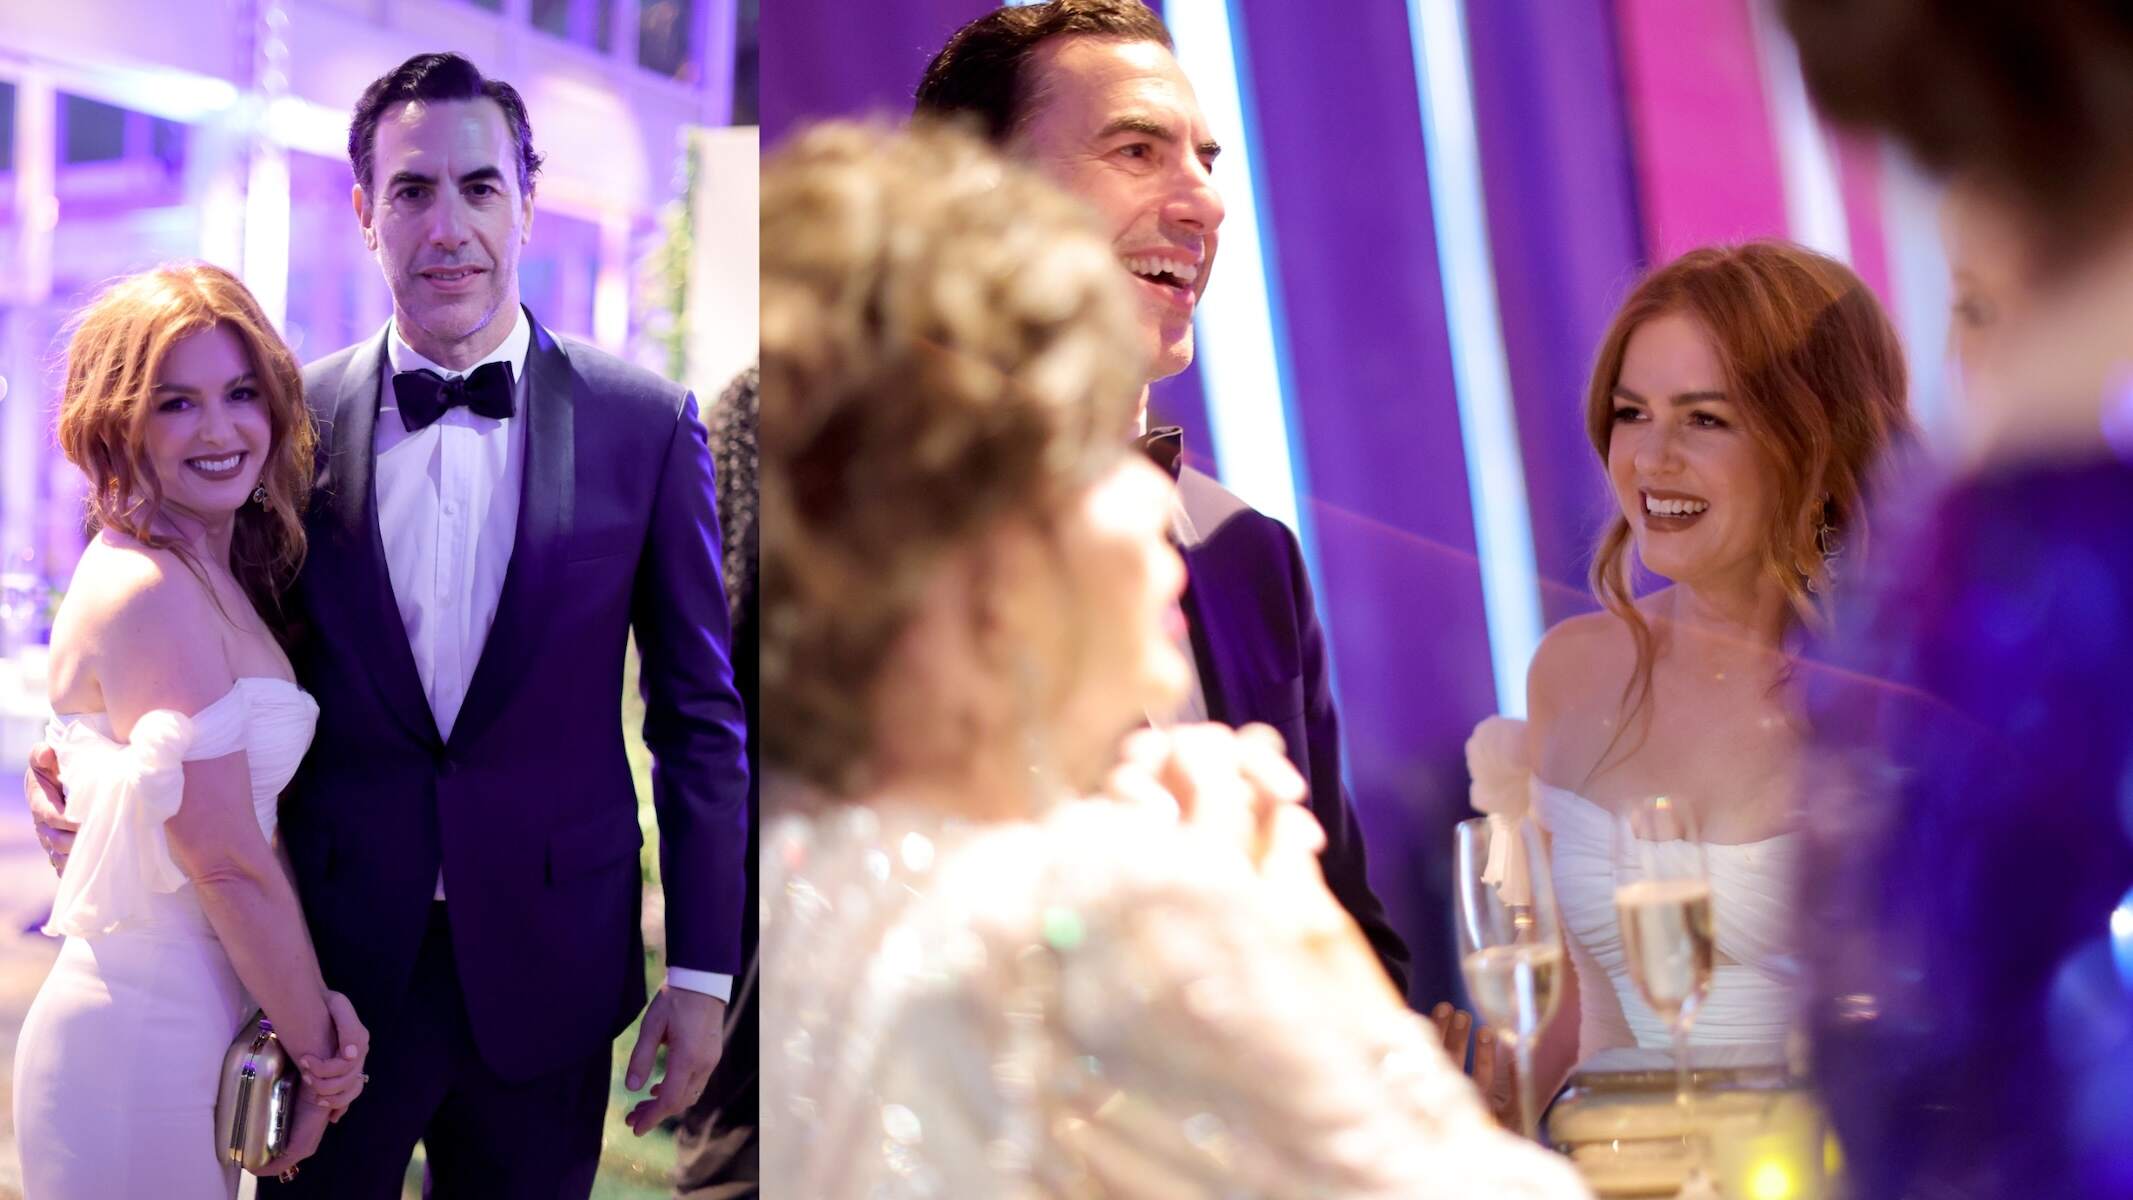 In a white dress and tuxedo respectively, Isla Fisher and Sacha Baron Cohen laugh together at the 2022 Vanity Fair Oscar Party